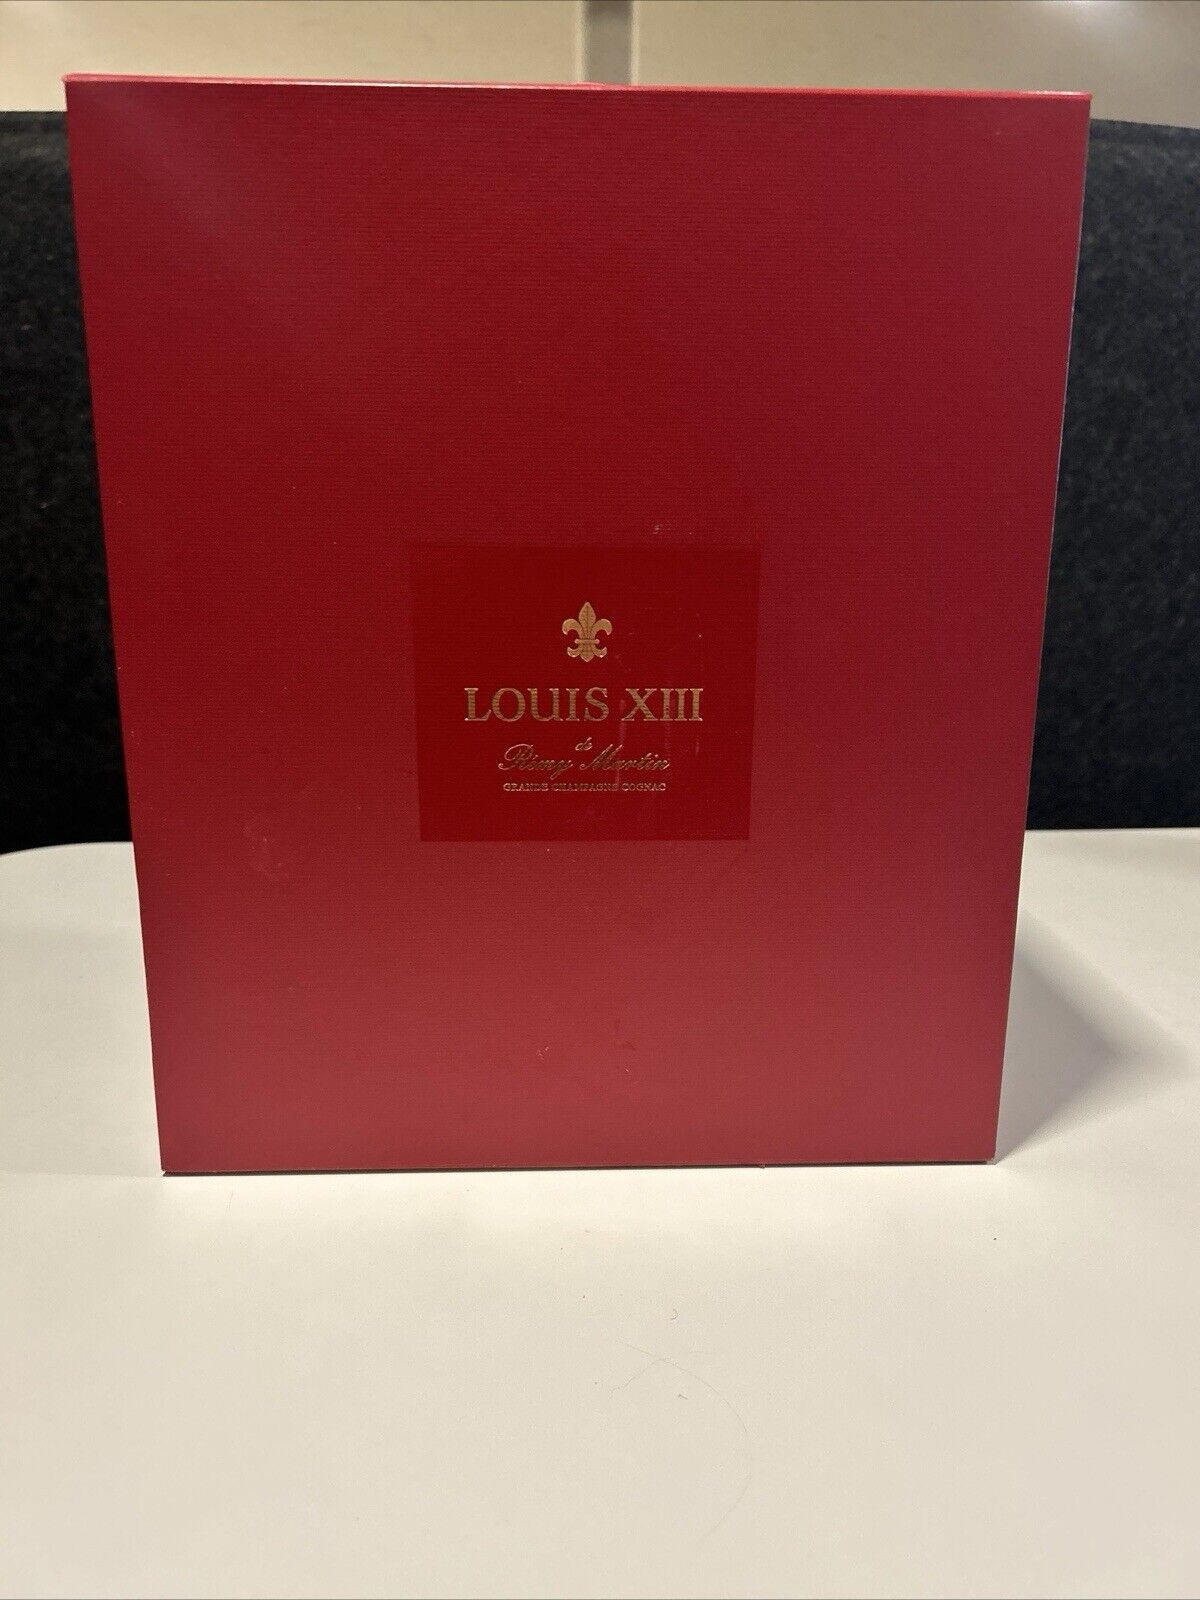 EMPTY LOUIS XIII BOTTLE WITH BOX